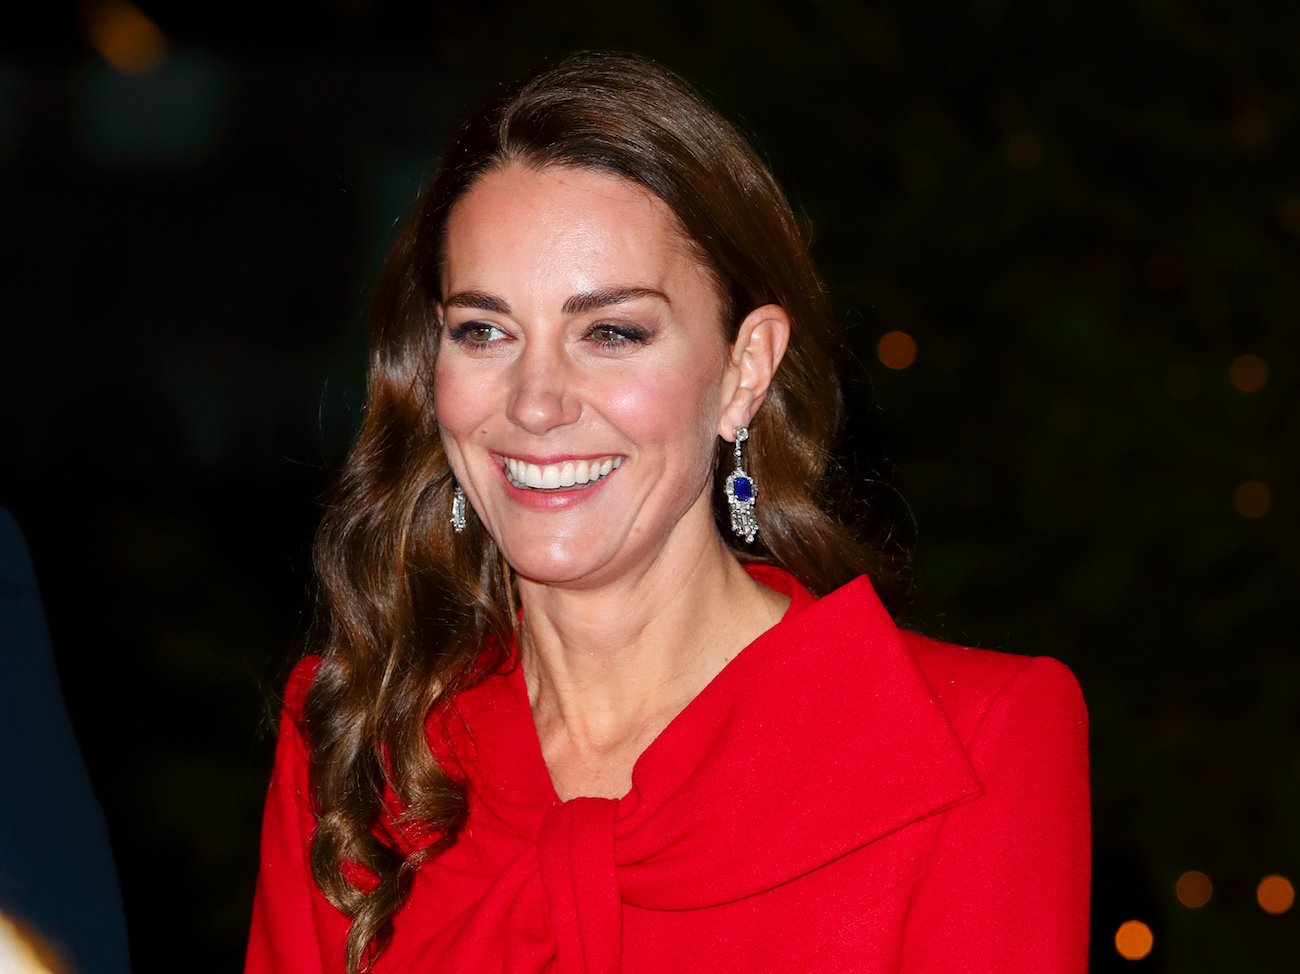 Kate Middleton smiles wearing a red coat as she arrives at 'Together at Christmas' carol TV special